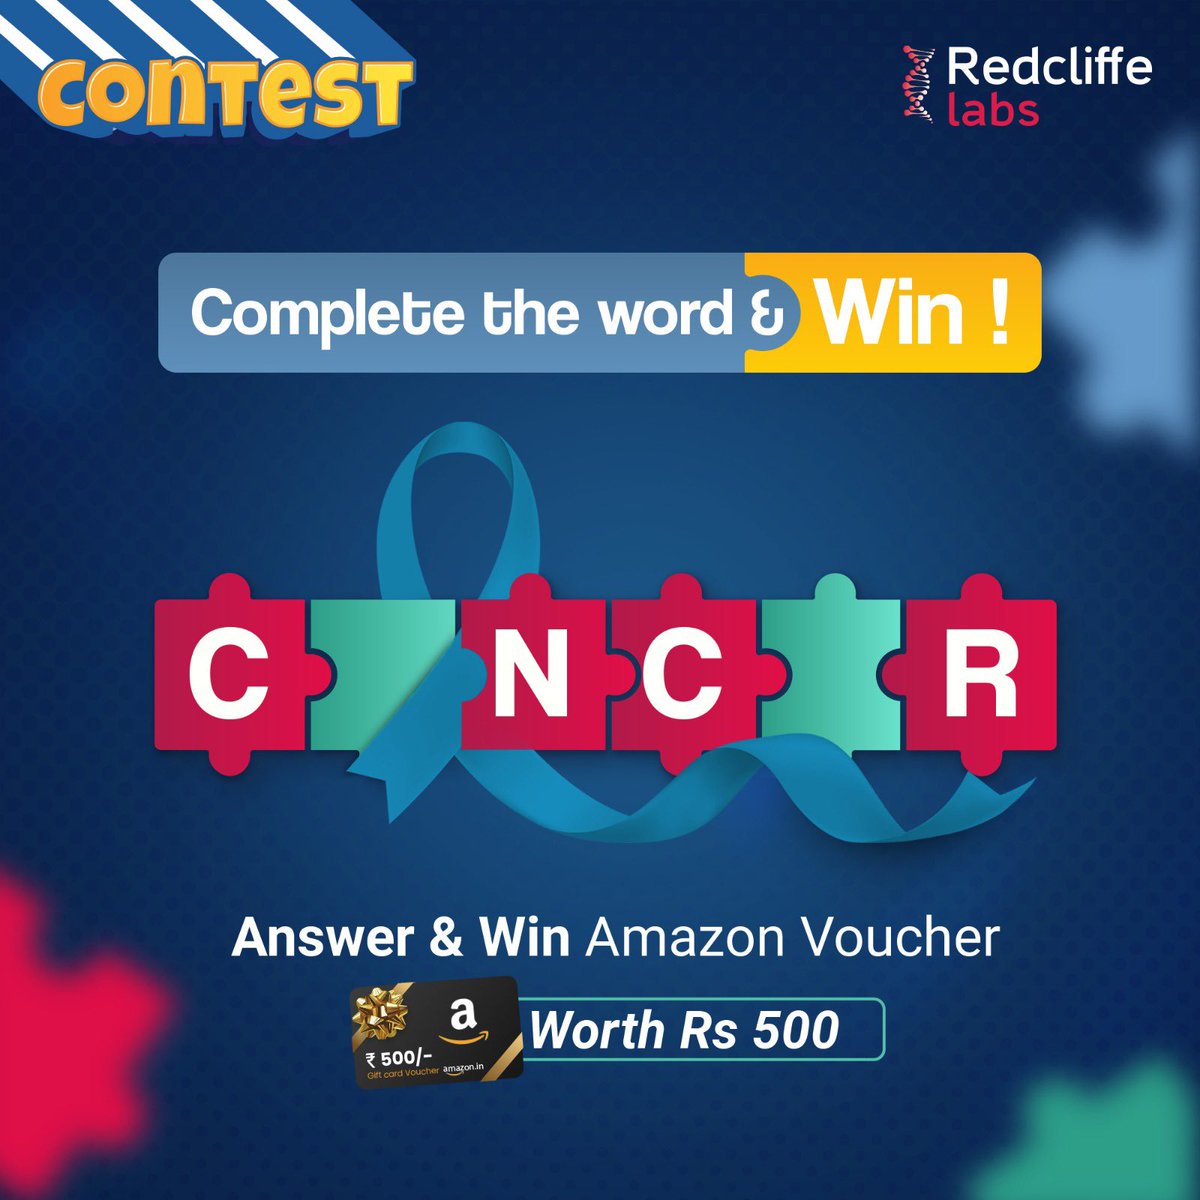 #ContestAlert! Fill in the missing letters and stand a chance to win an Amazon voucher worth Rs 500! Ready for the challenge? Steps: 1. Follow us on Insta, FB, YT & Twitter. 2. Tag 5 friends Entries valid till 7th February, 7 PM. #Redcliffelabs